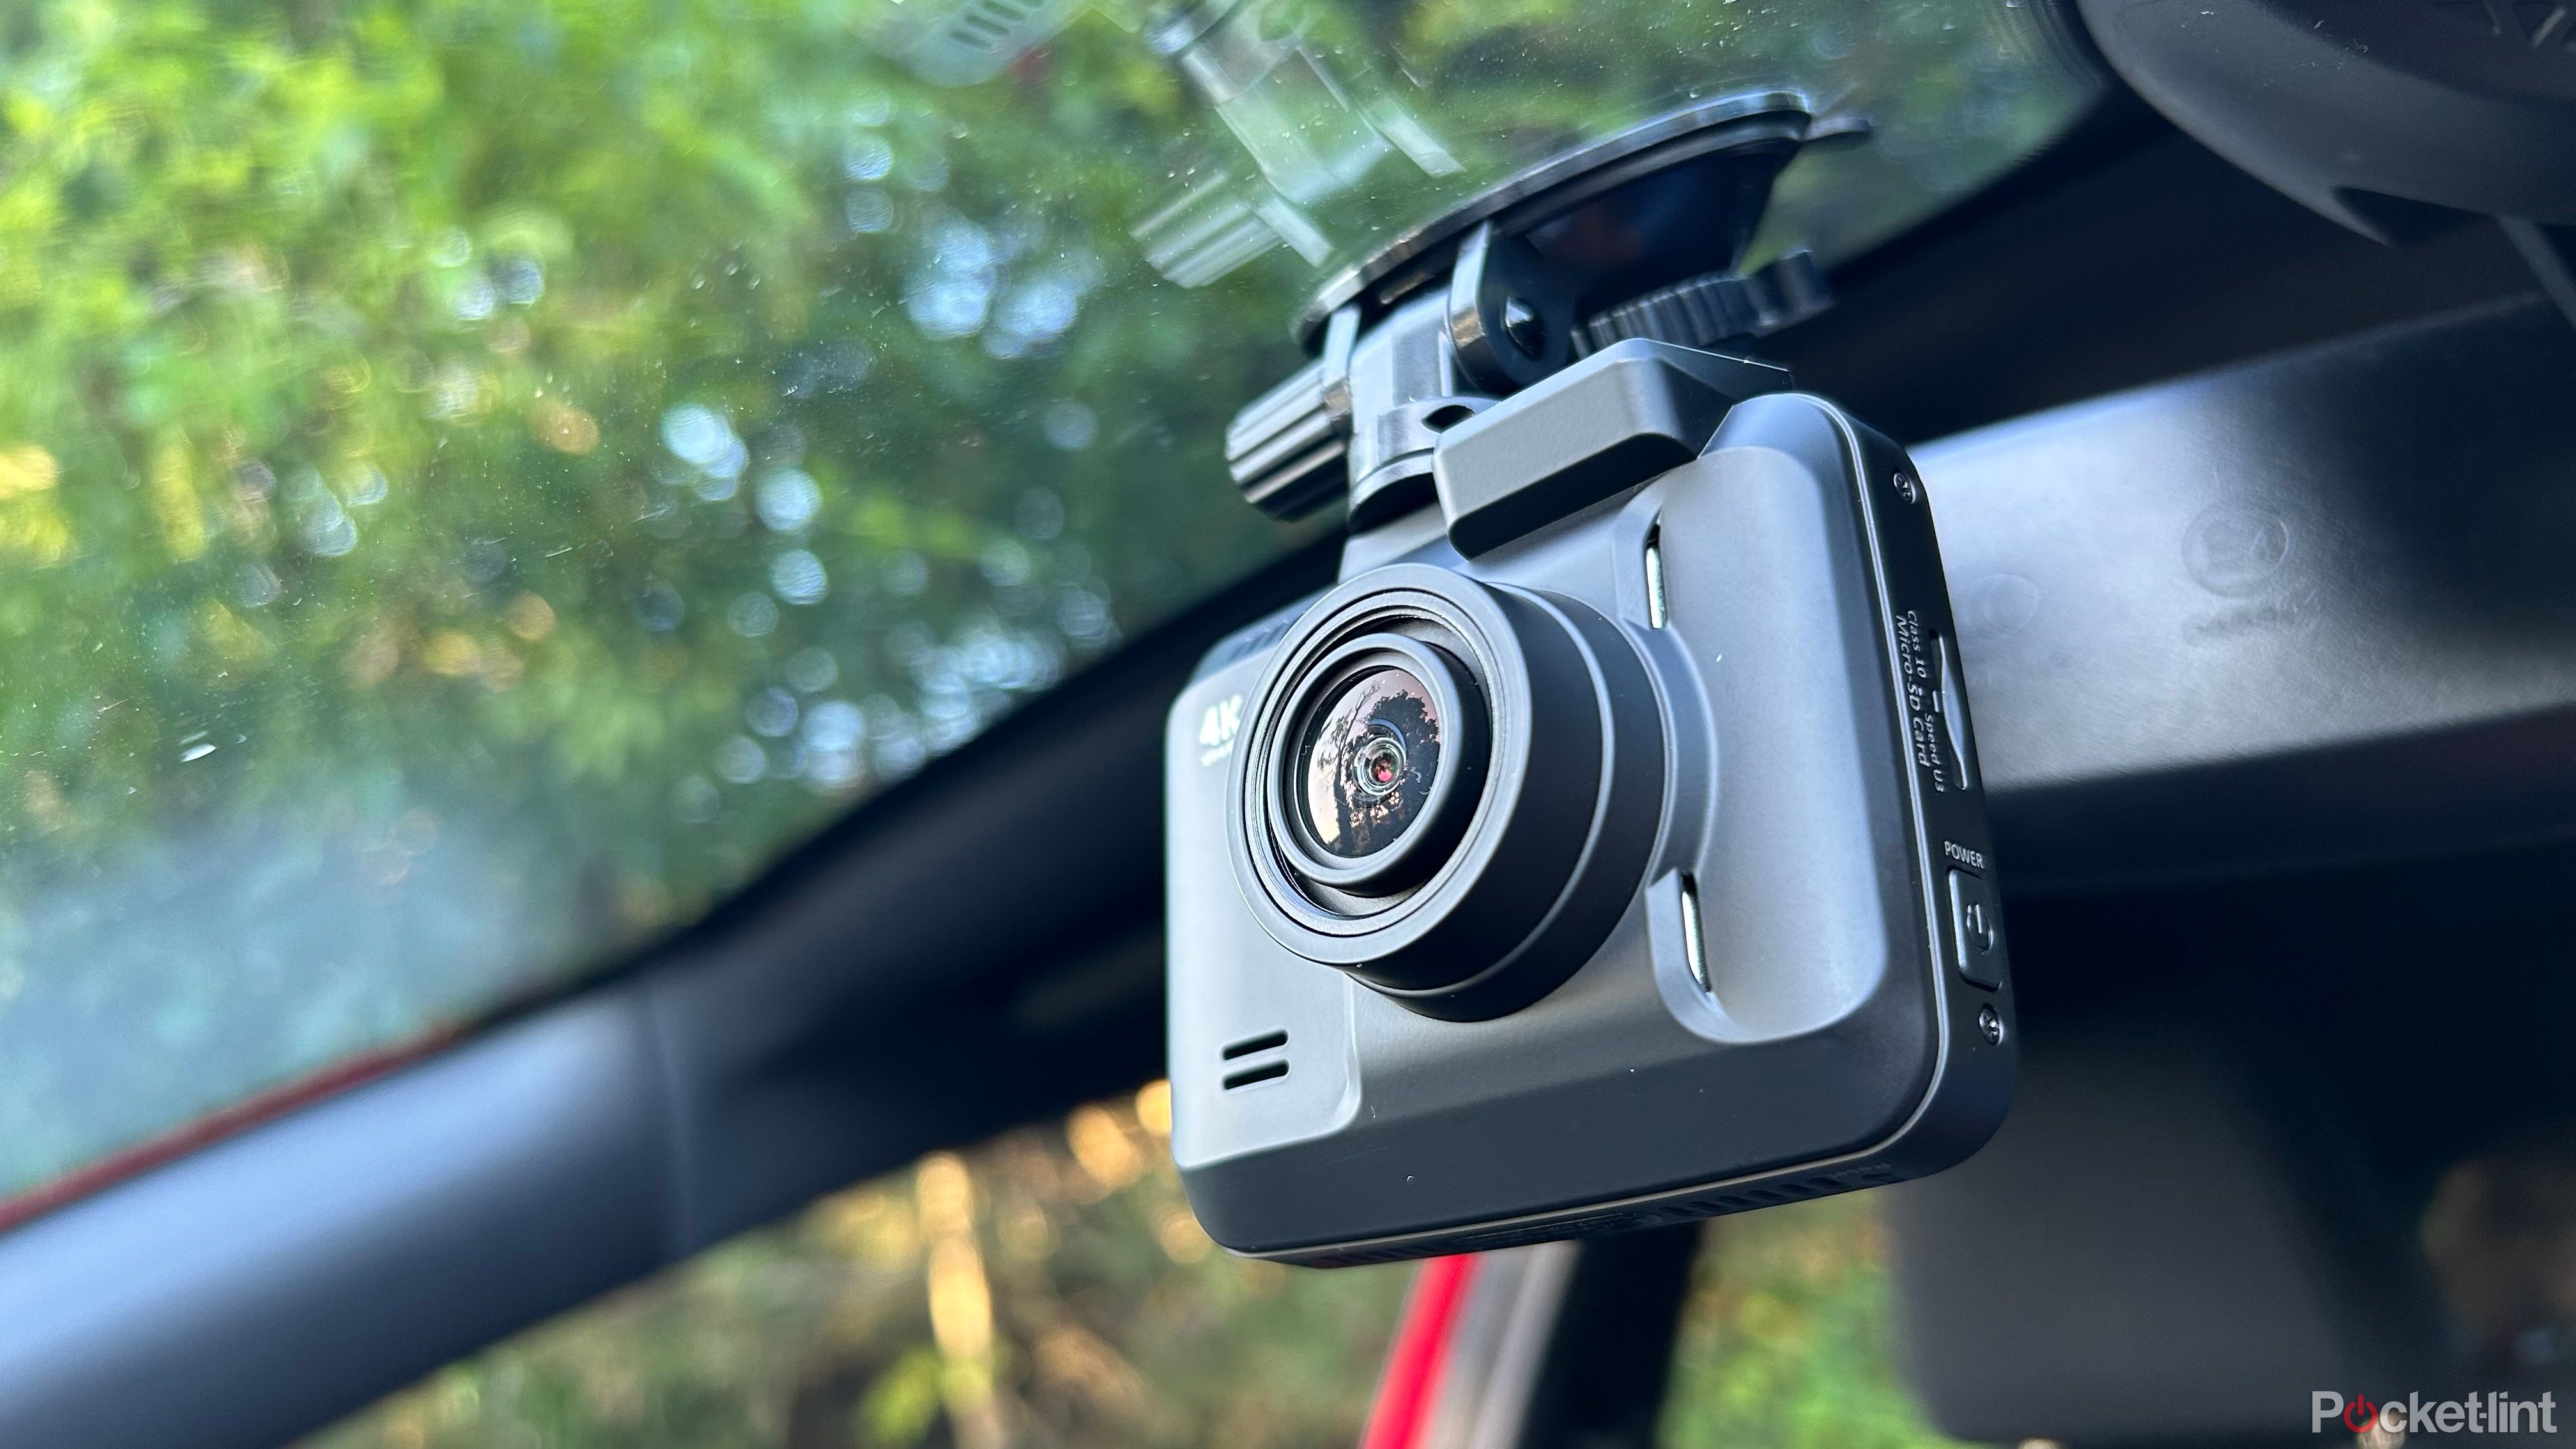 Rove R2-4K Pro suctioned to a car windshield